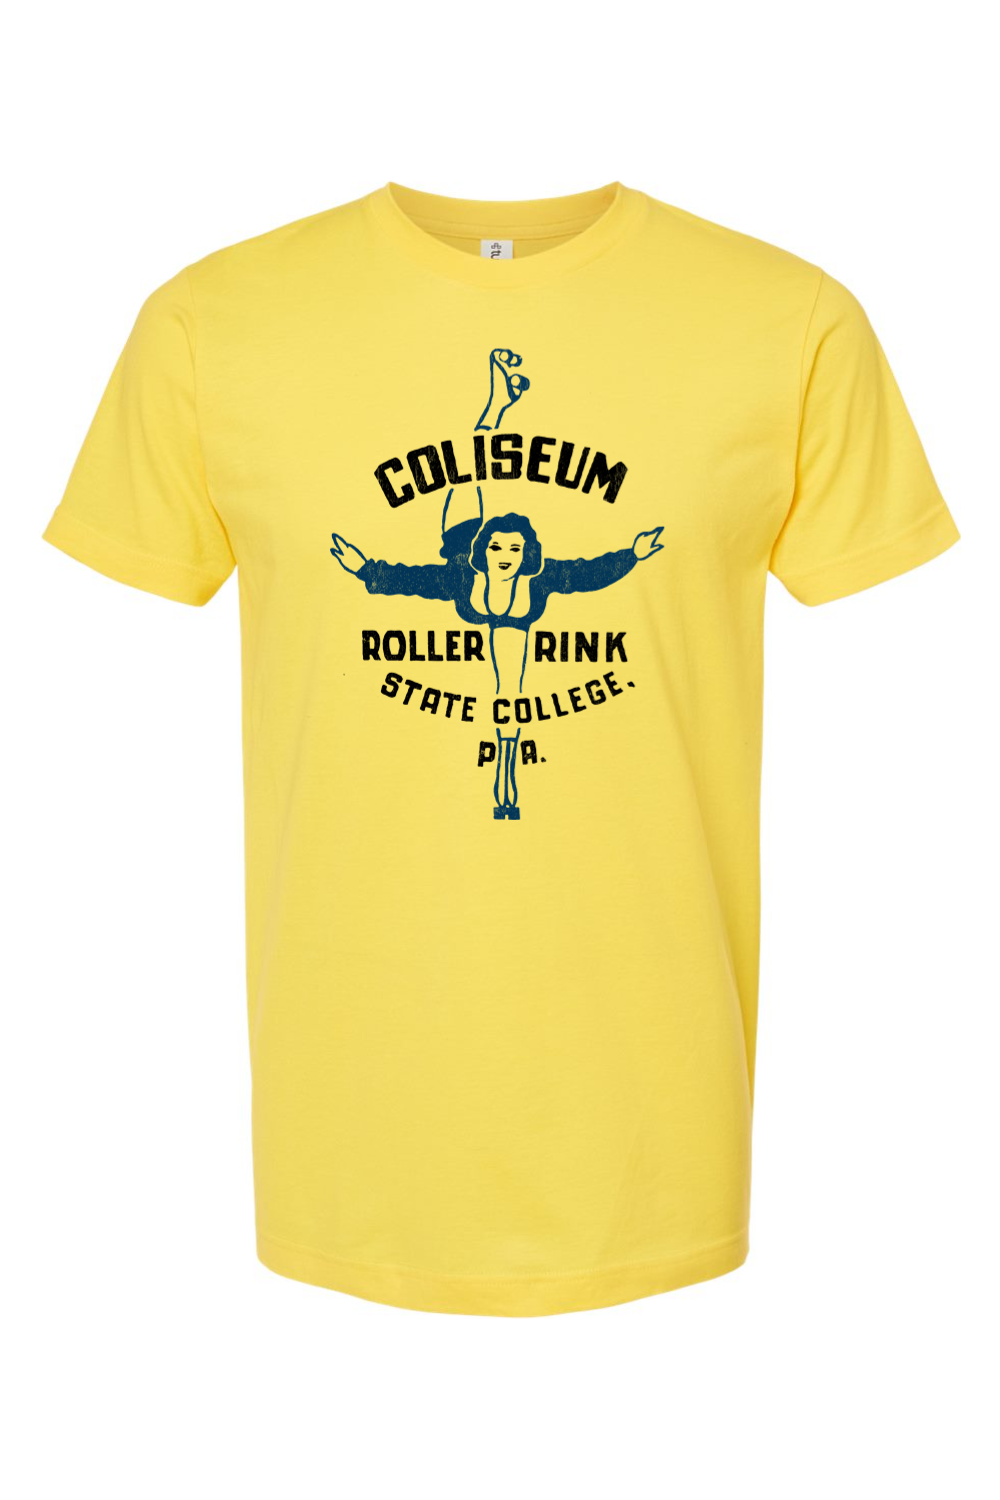 Coliseum Roller Rink - State College, PA - Yinzylvania